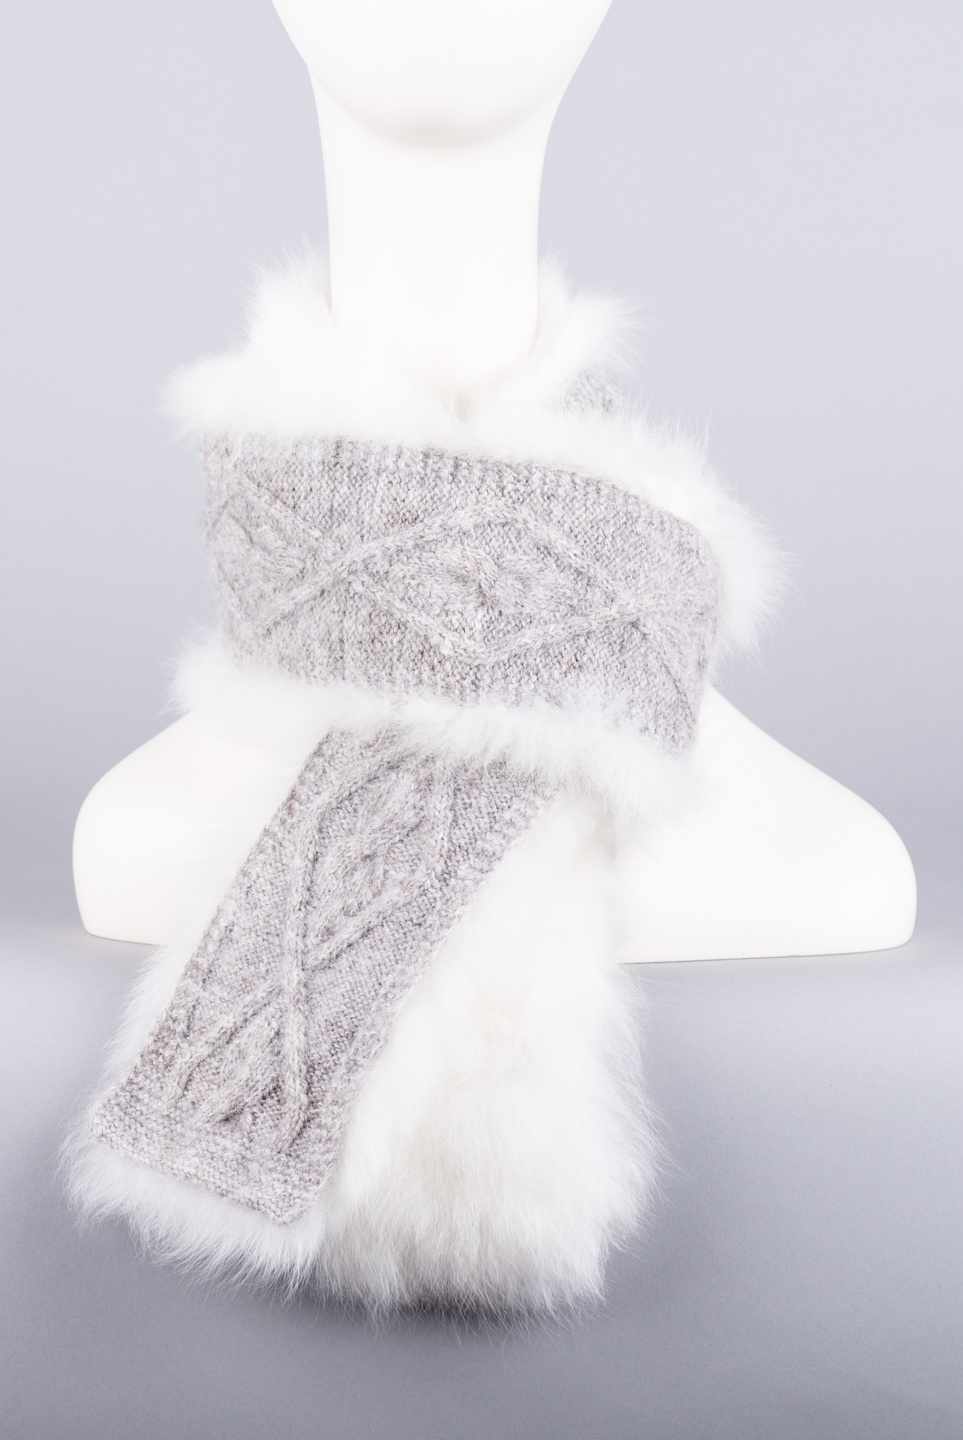 foulard tricot-fourrure / fur-trimmed knitted scarf